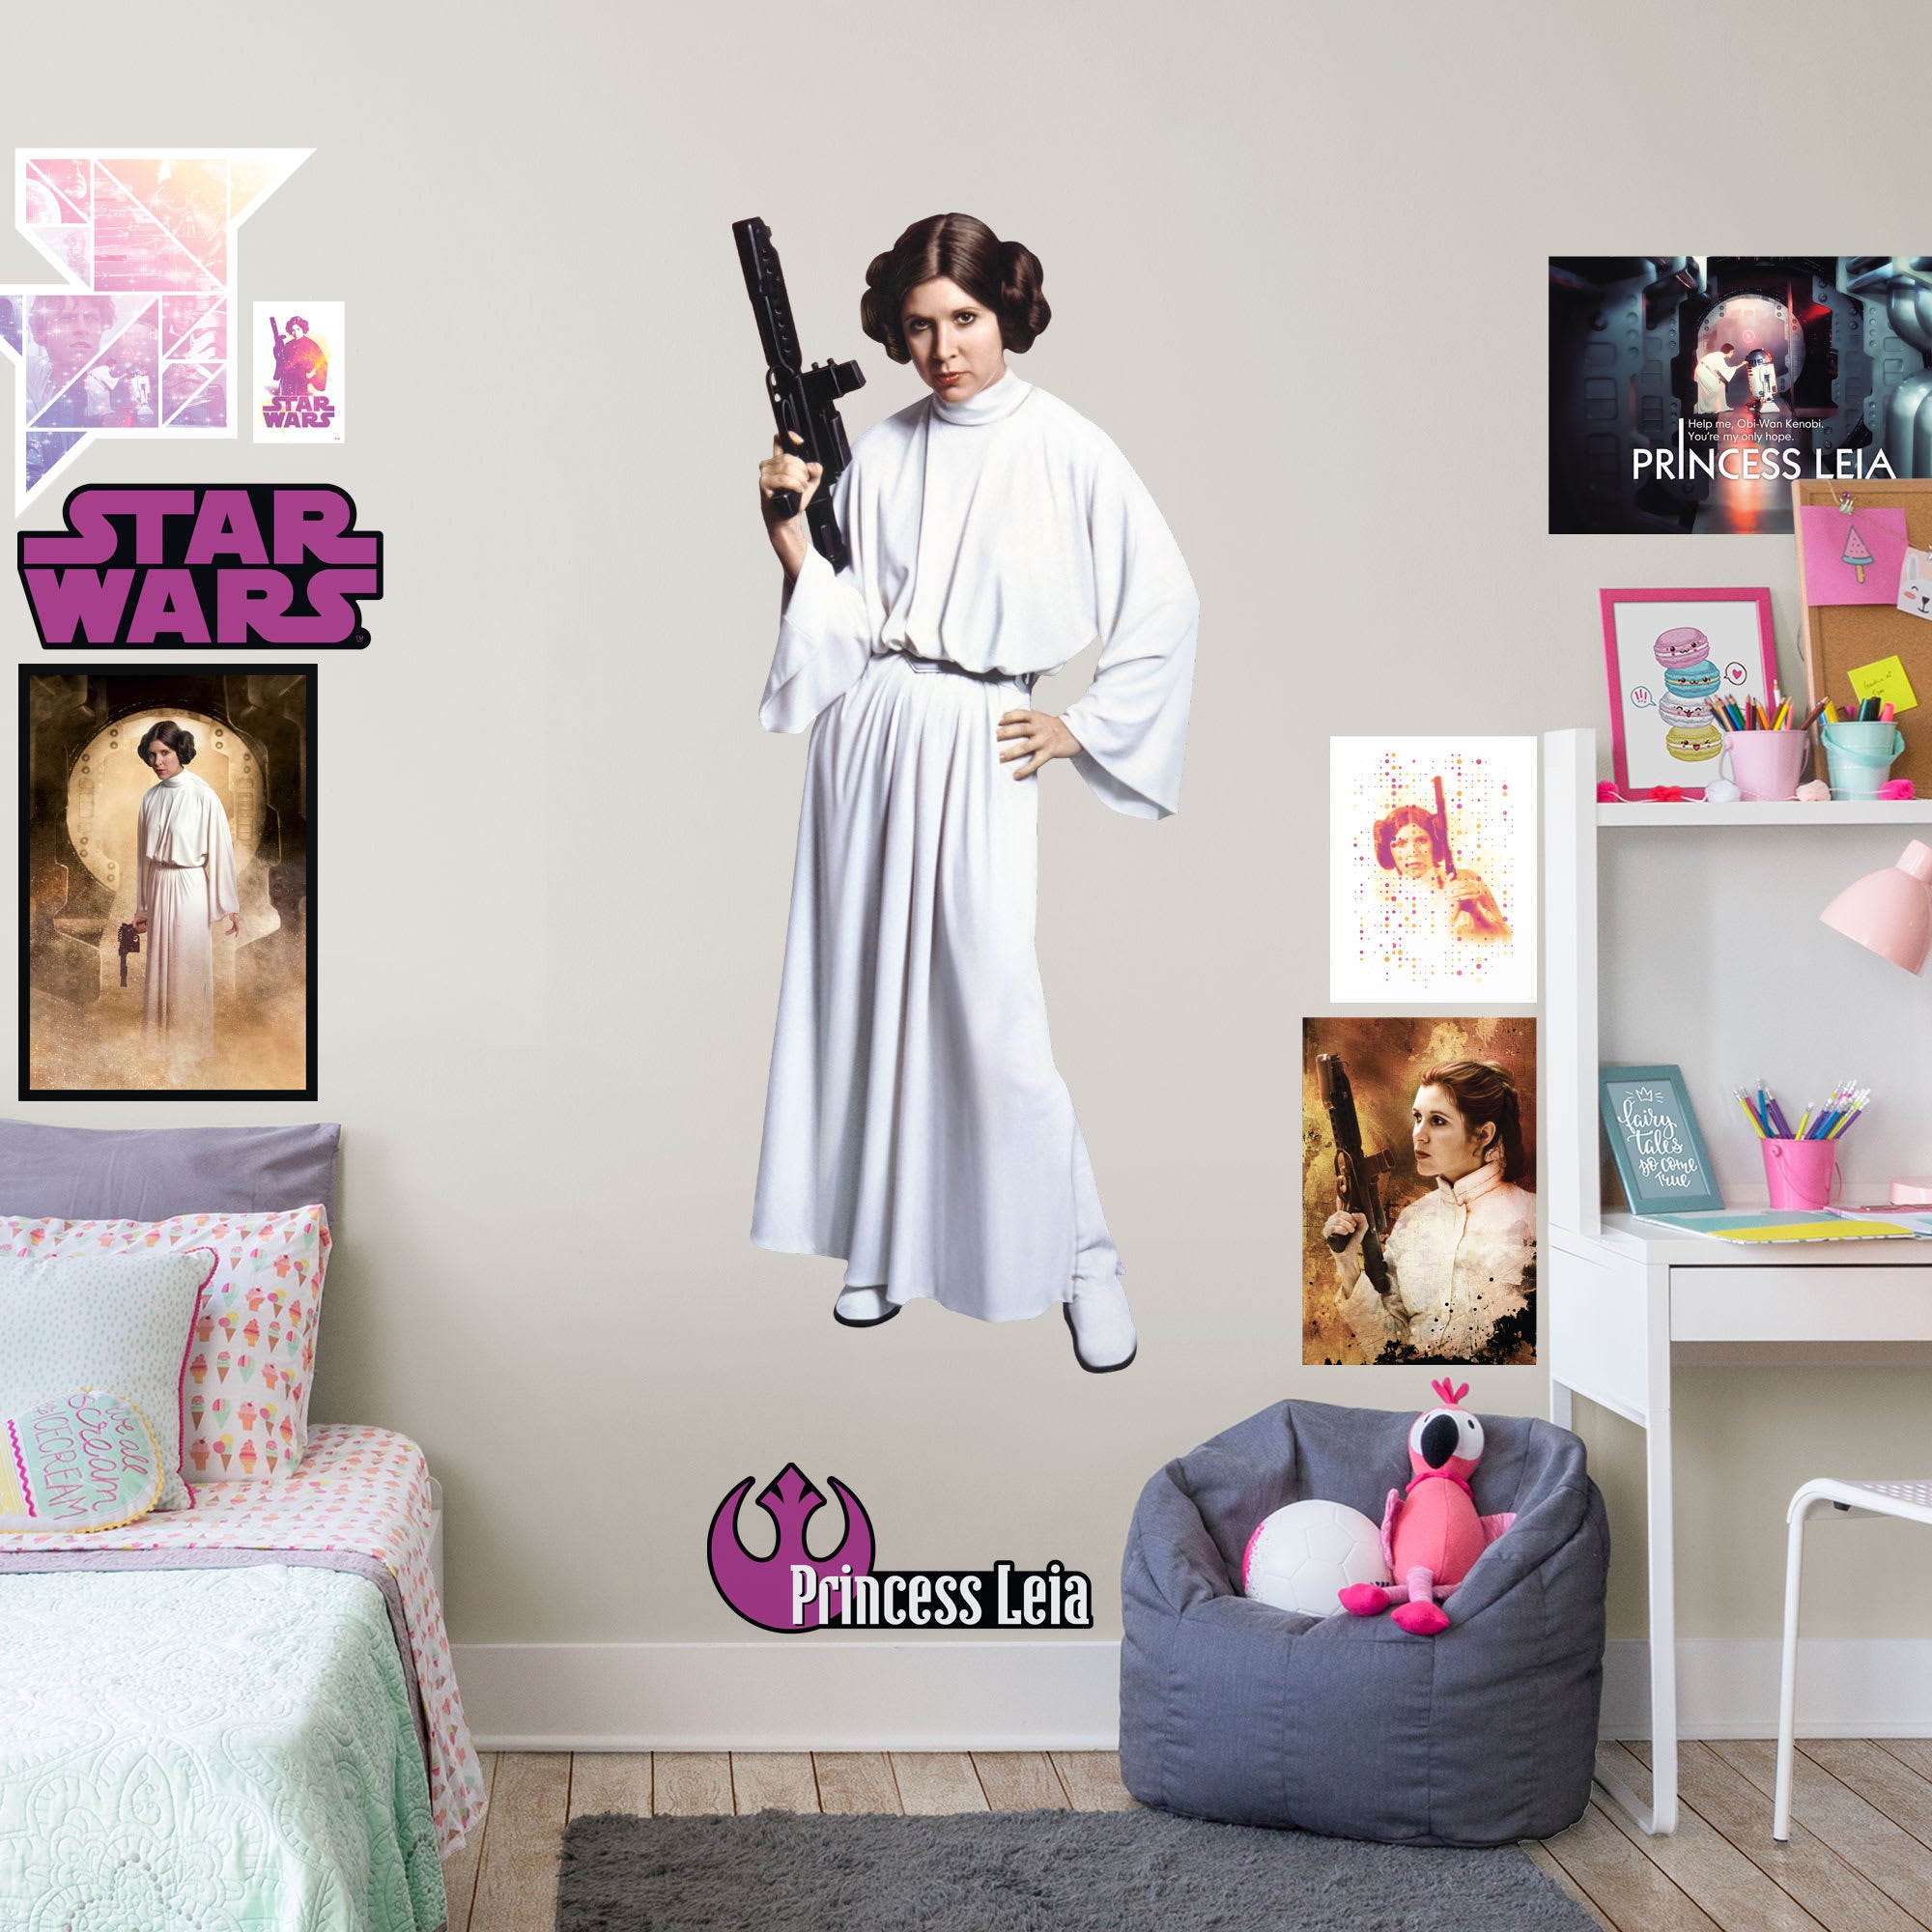 Princess Leia - Officially Licensed Removable Wall Decal Life-Size Character + 8 Decals (27"W x 66"H) by Fathead | Vinyl